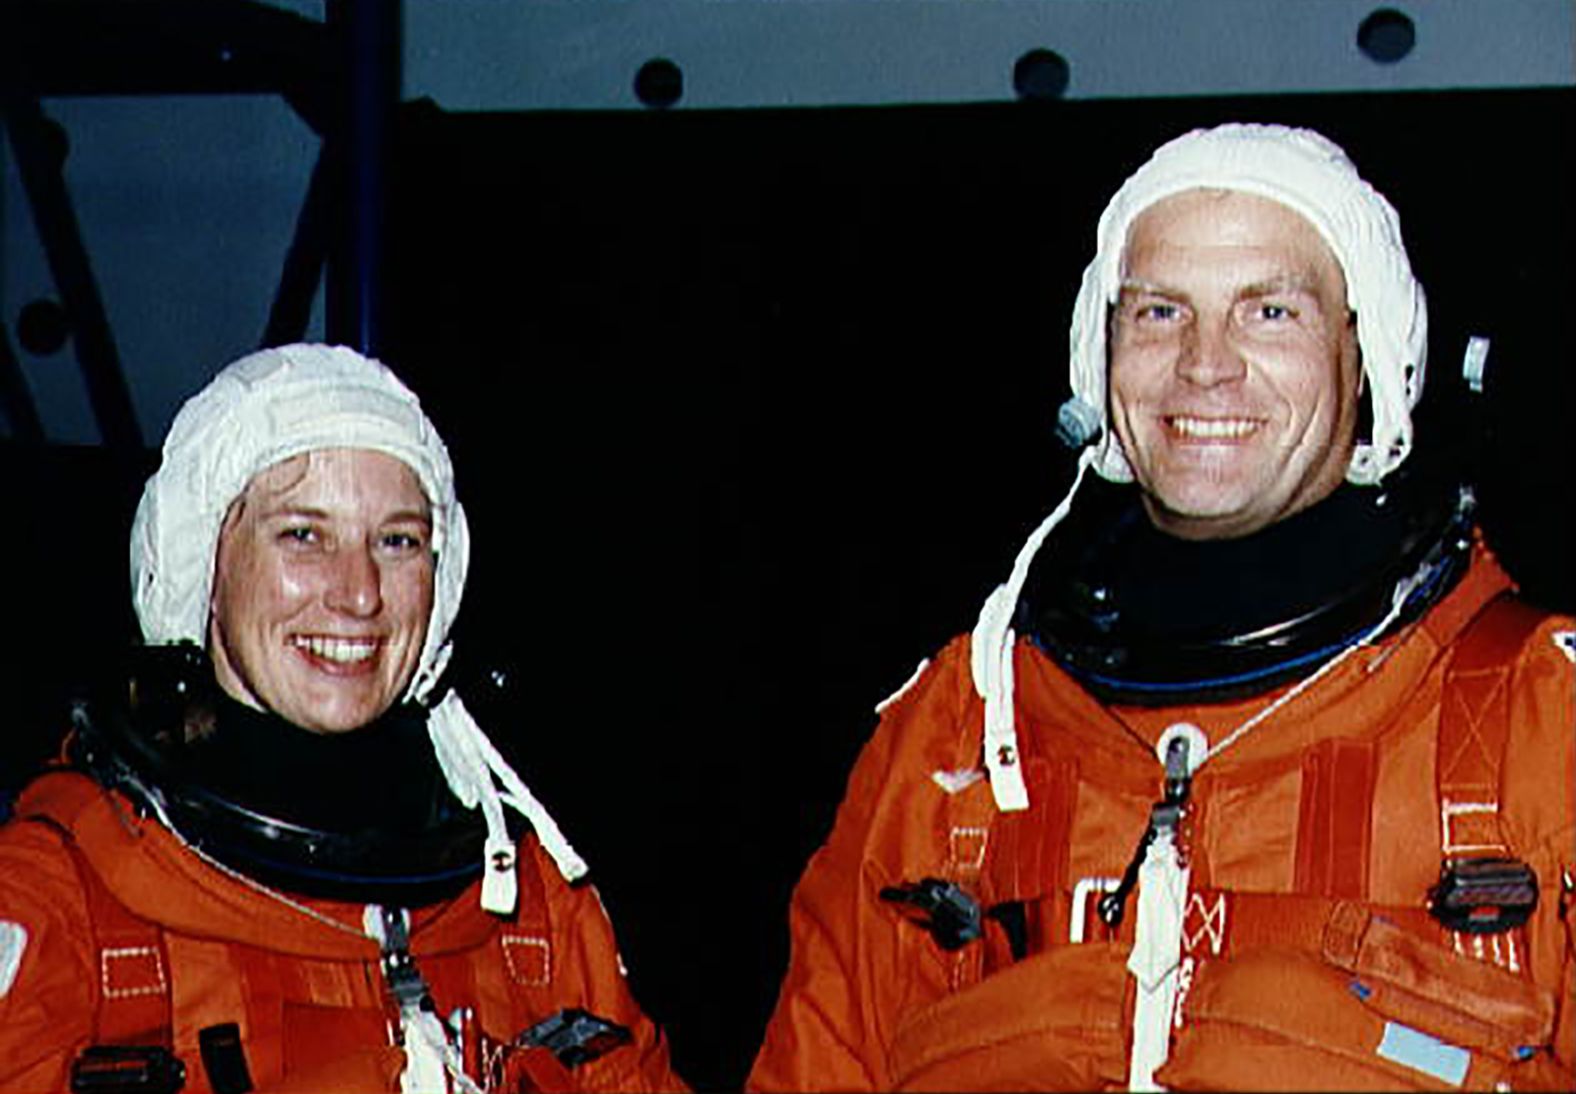 Jan Davis and Mark Lee were the first couple to go into space together when the husband and wife were astronauts on the space shuttle Endeavour in 1992.